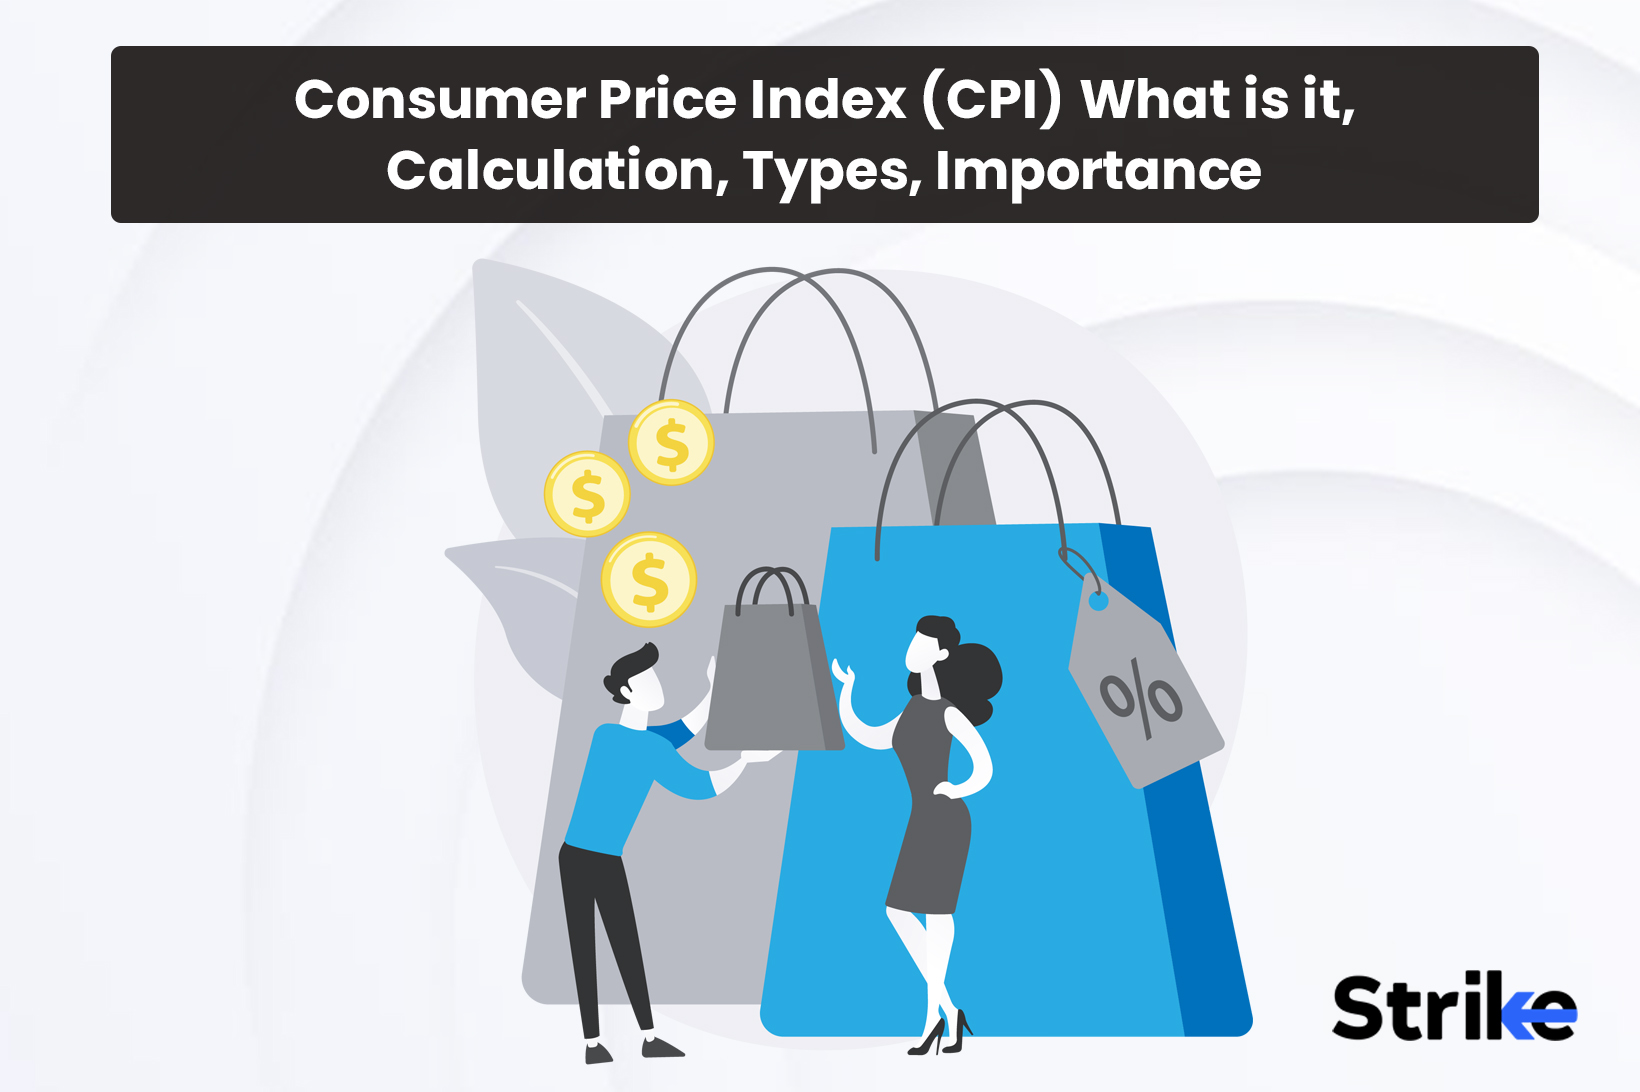 Consumer Price Index (CPI): What is it, Calculation, Types, Importance